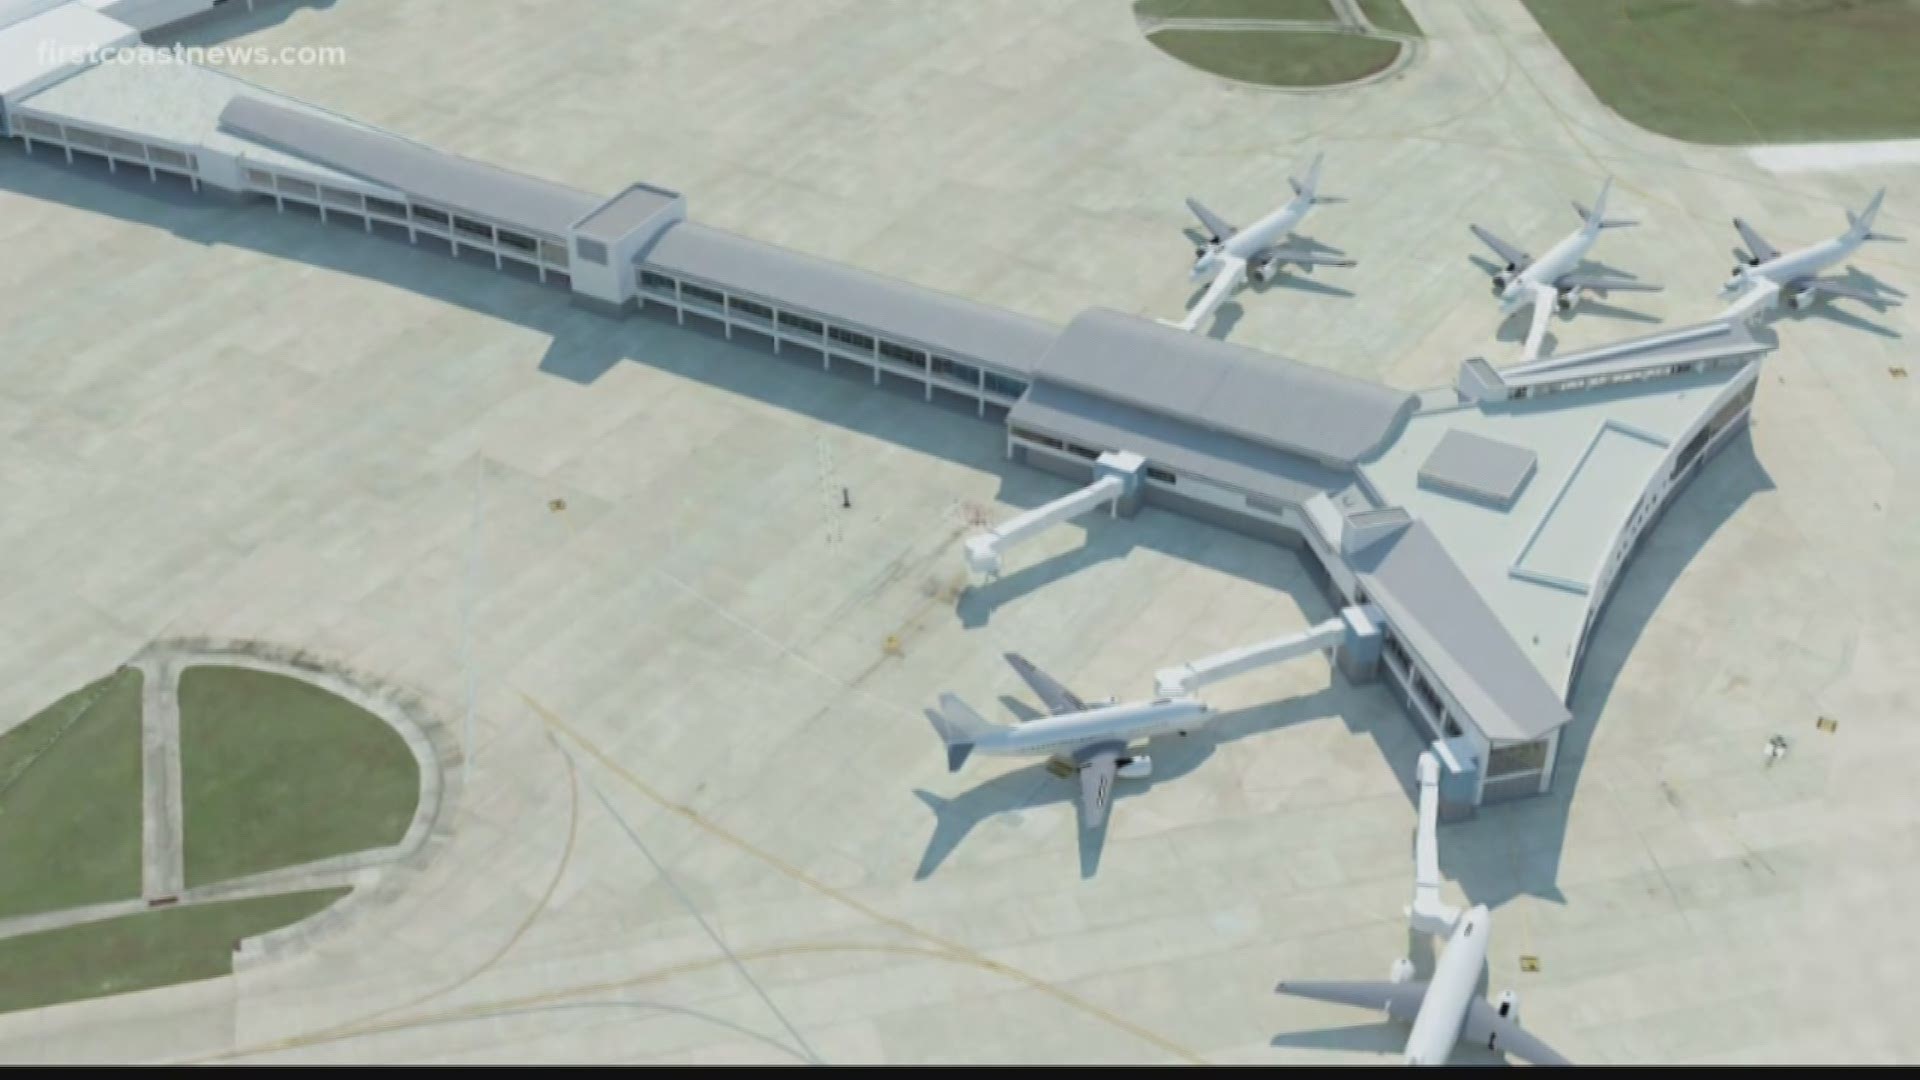 Jacksonville International Airport has plans to expand with a new concourse, six news gates and more.